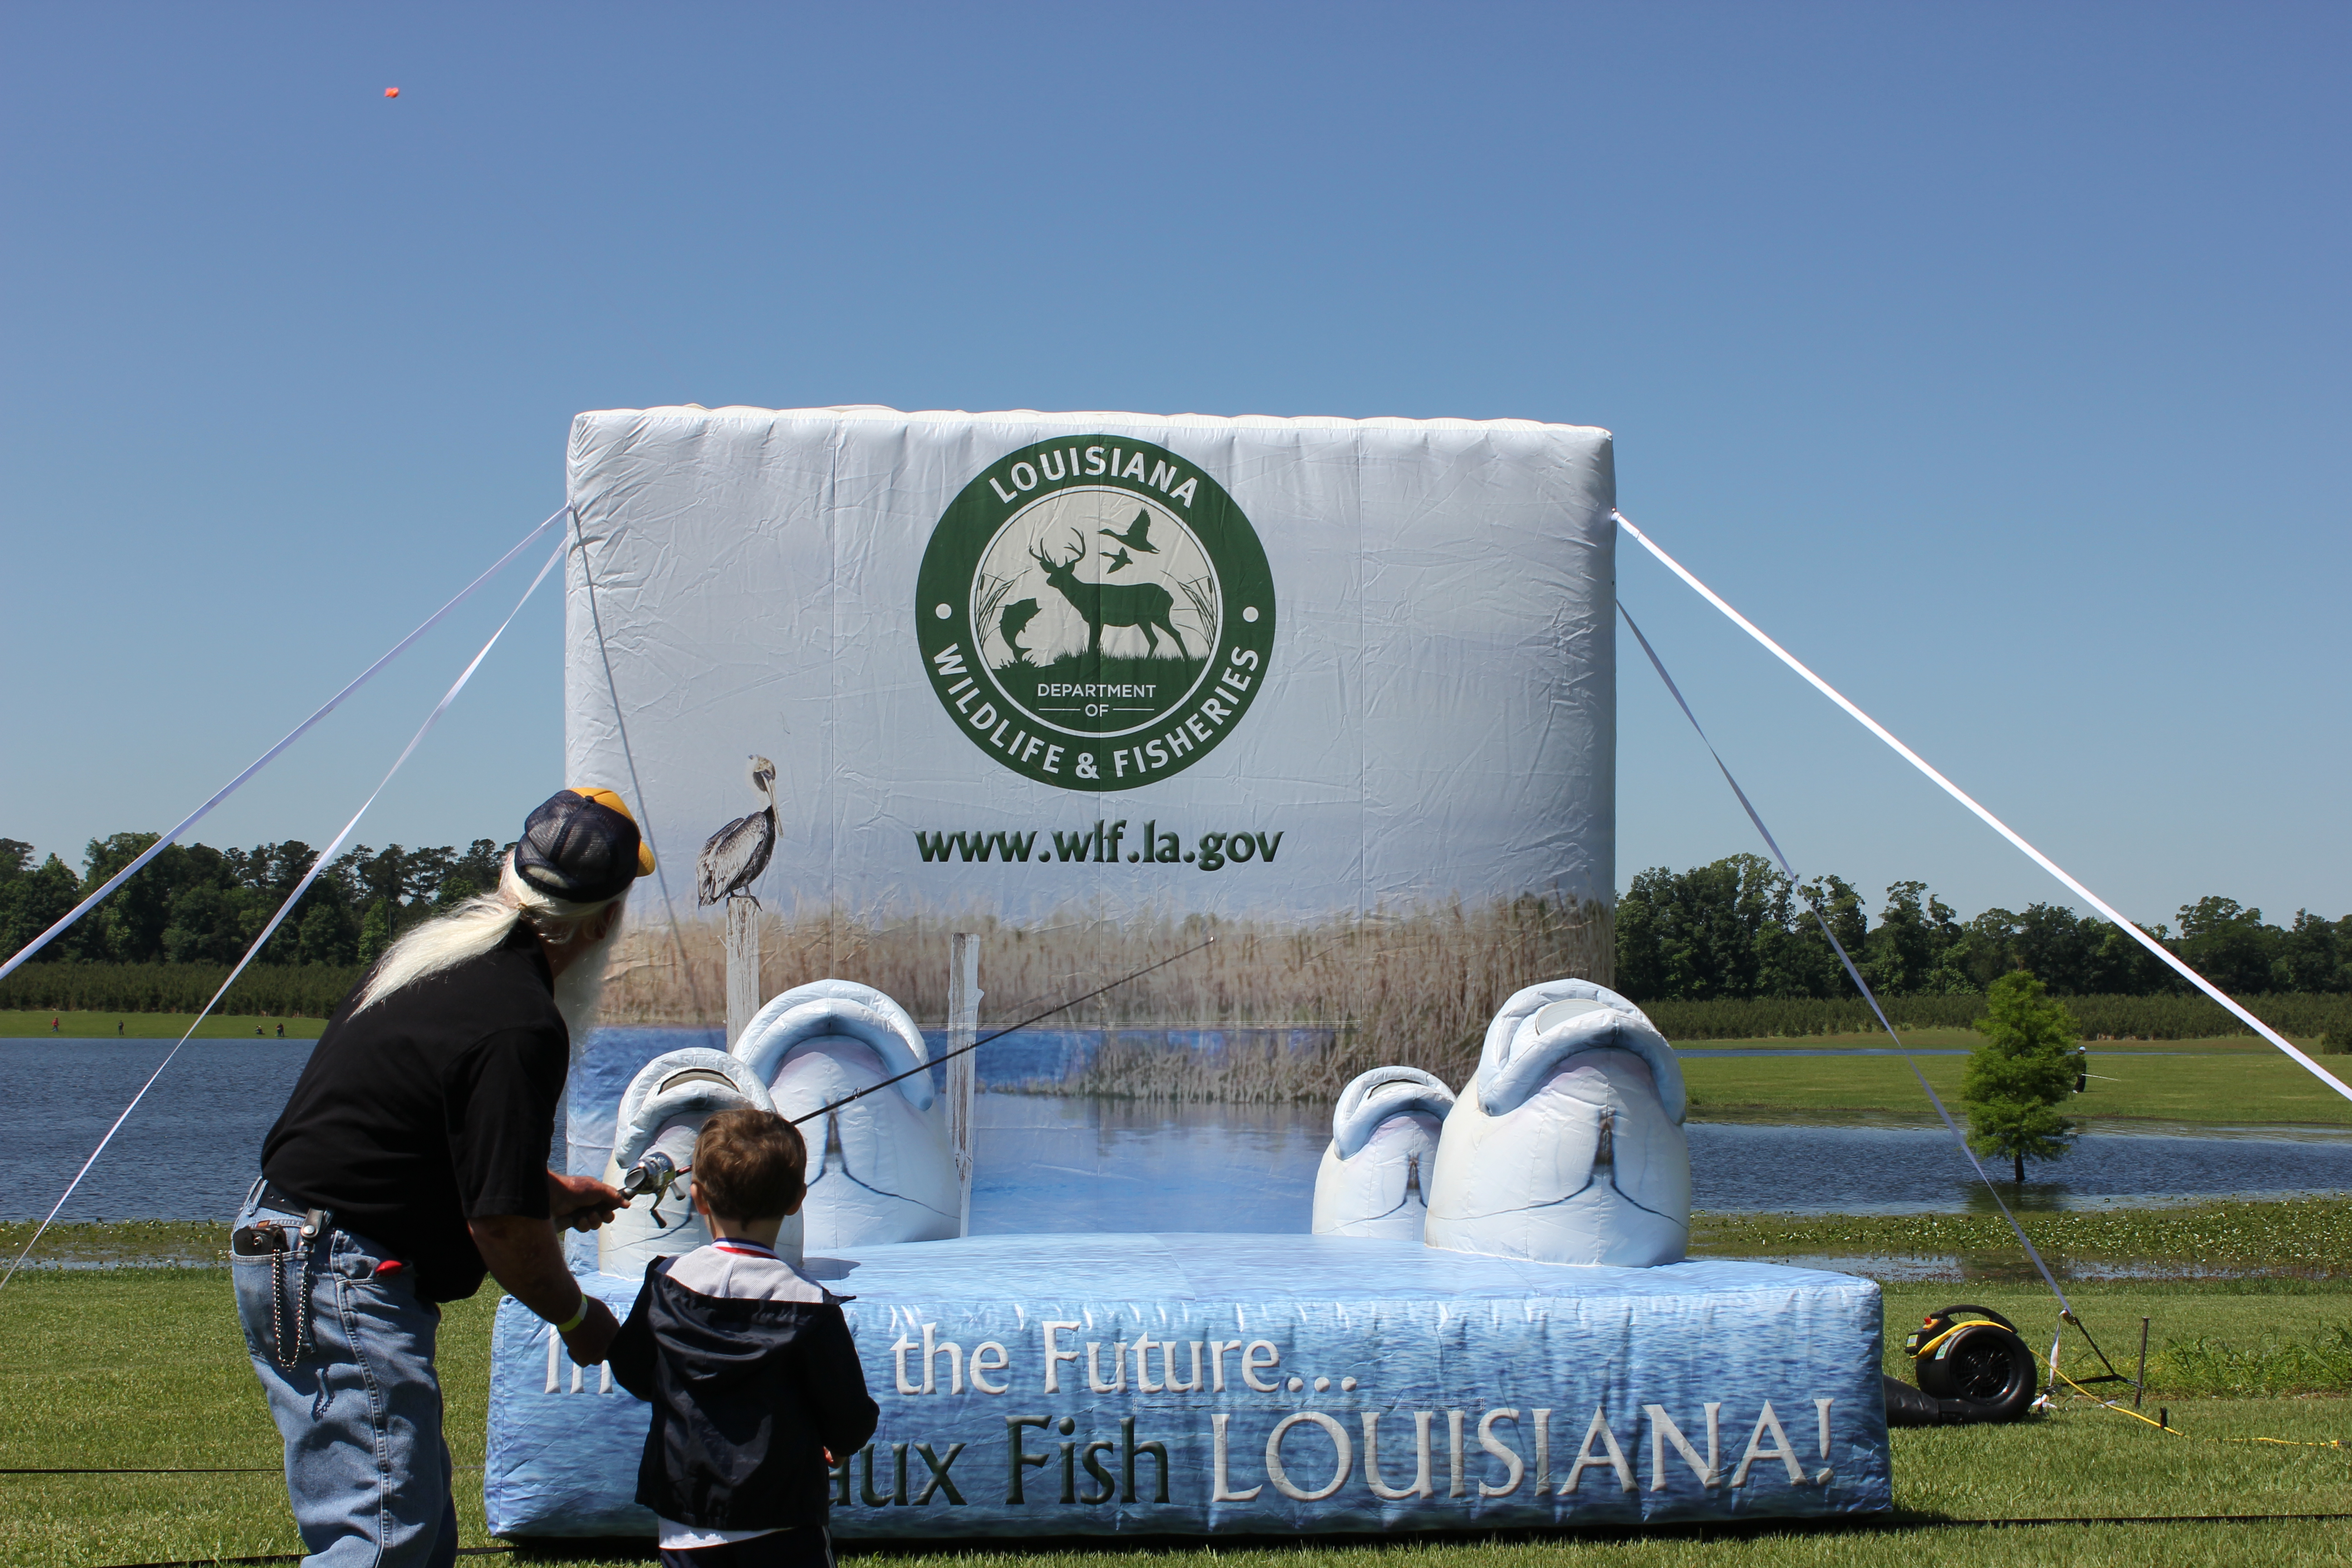 https://www.wlf.louisiana.gov/assets/Events_And_Education/Images/fff_casting_inflatable.JPG